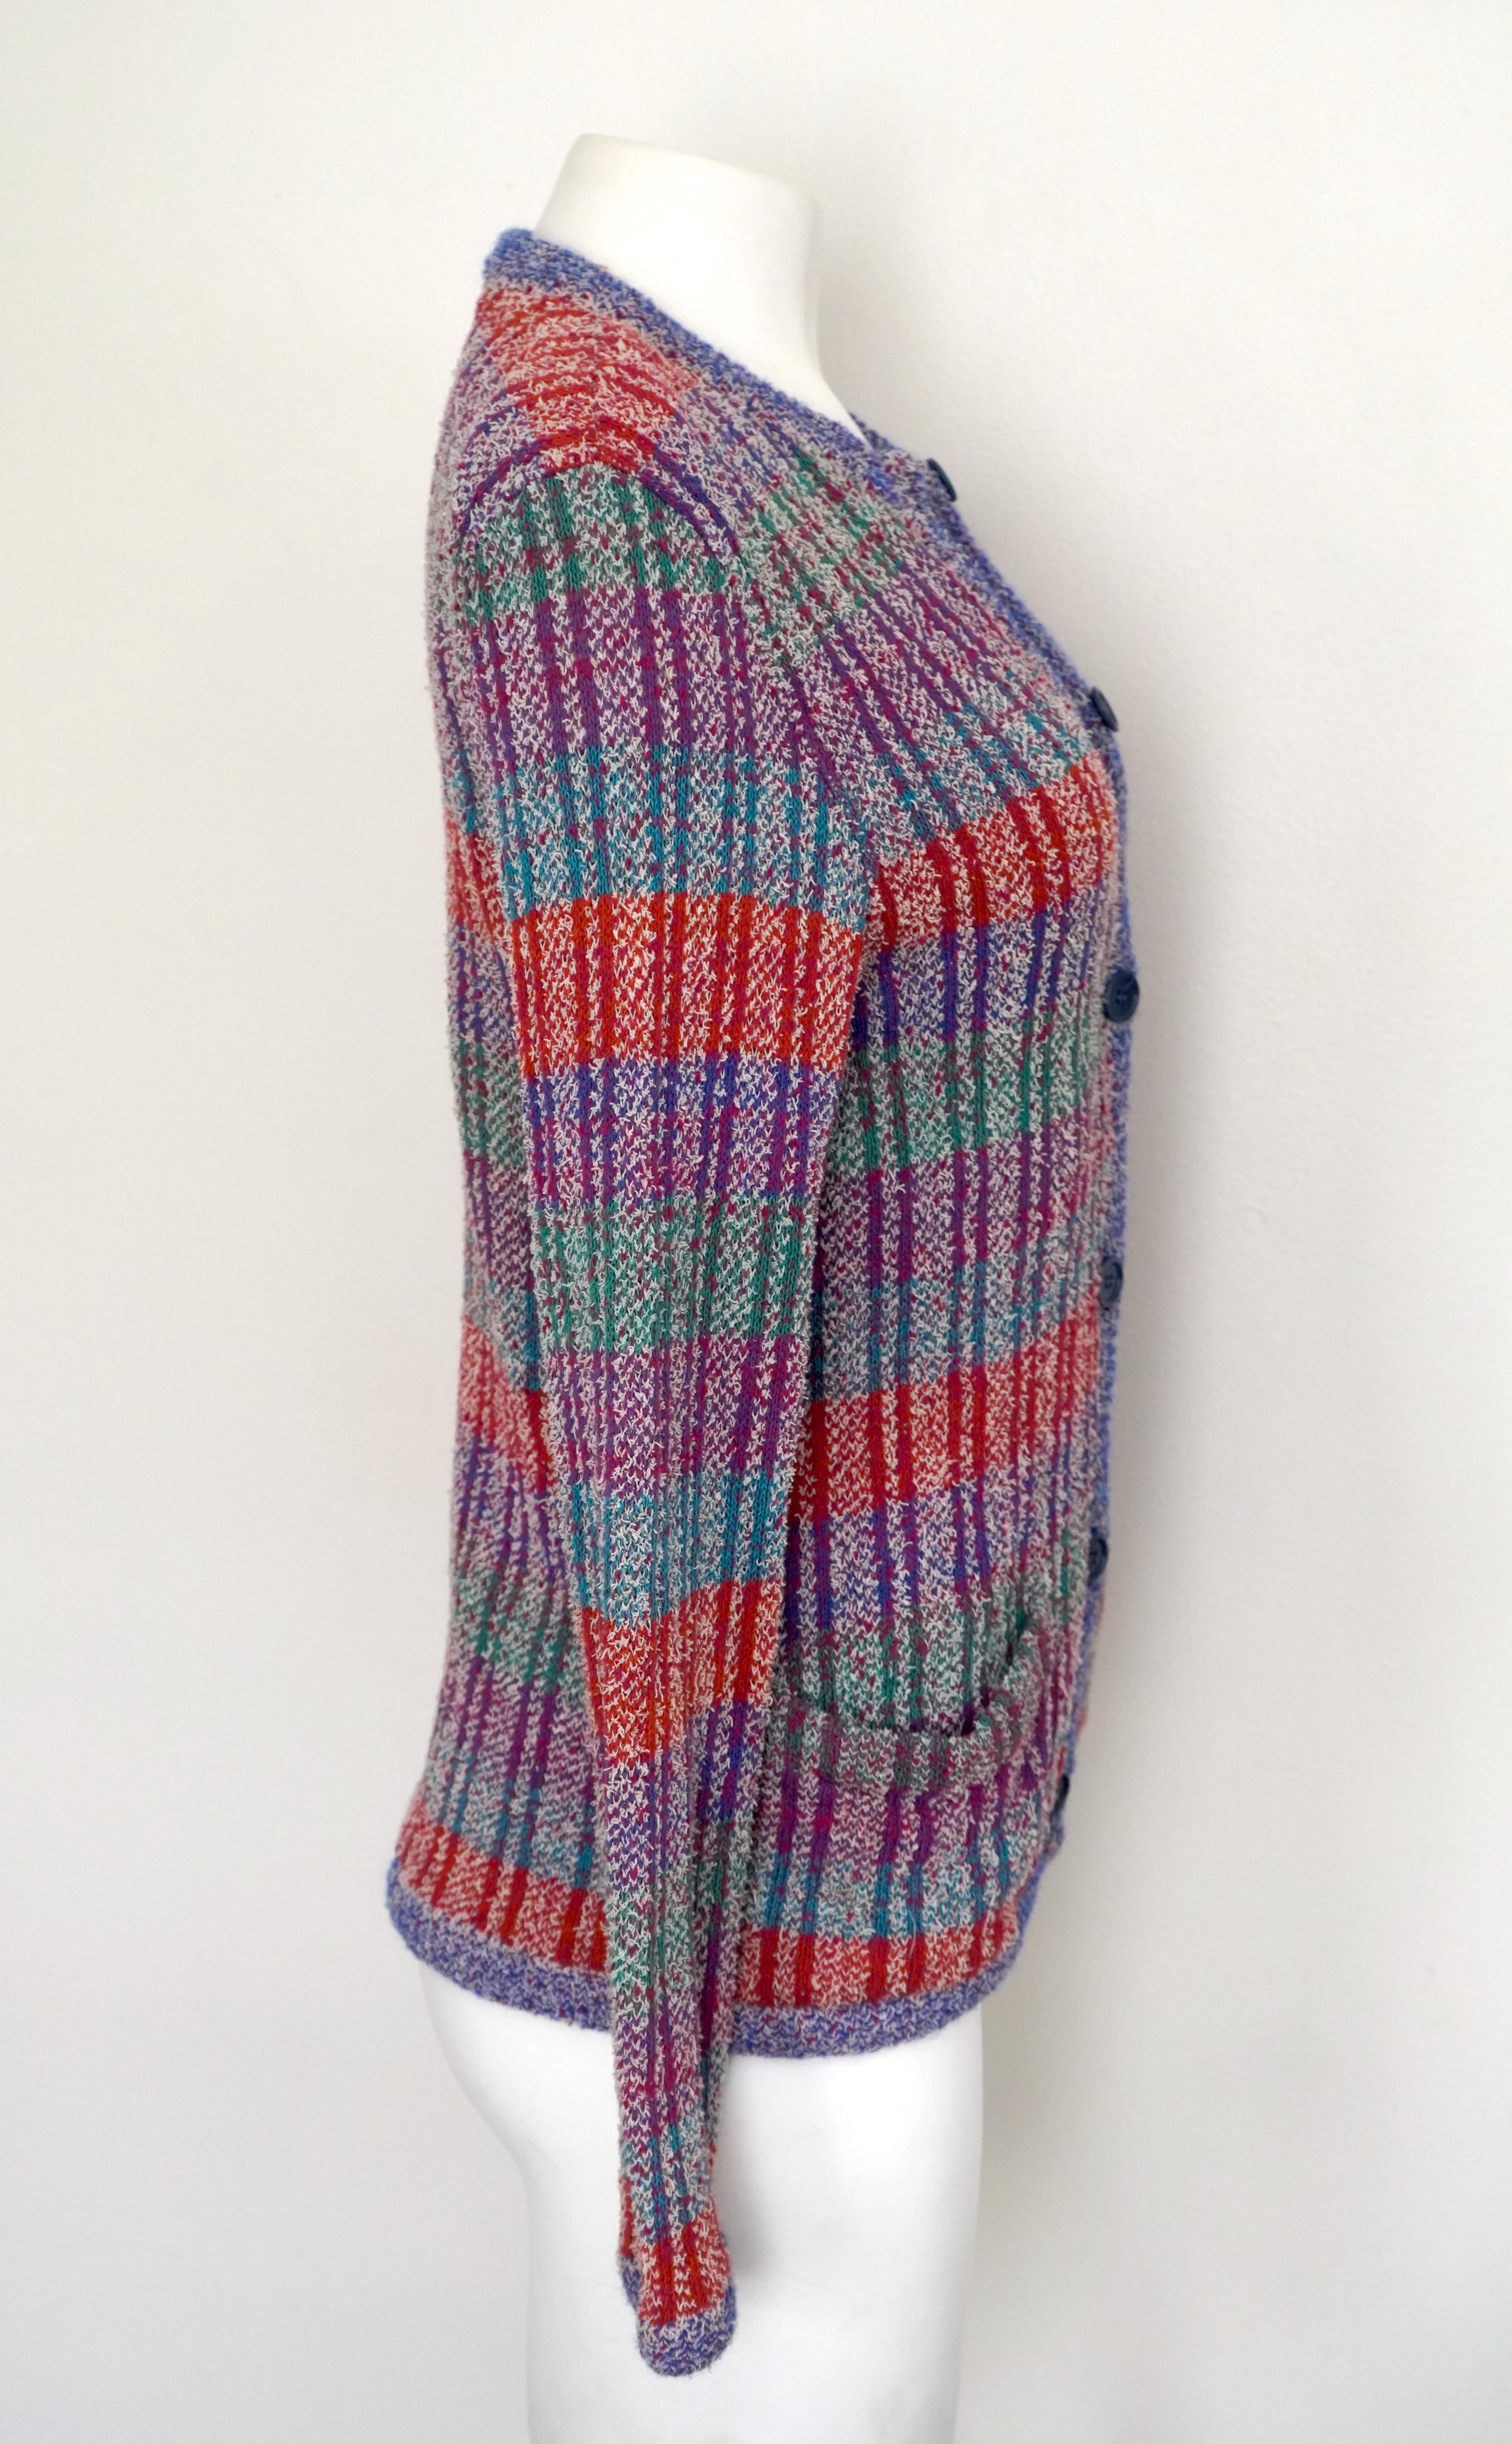 This colorful Missoni cardigan sweater is in great condition. It has a 6 blue button closure, with 2 front pockets. 
It is made of cotton, wool, linen, & nylon, in the colors: royal blue, light blue, purple, green, red, and white. There is no